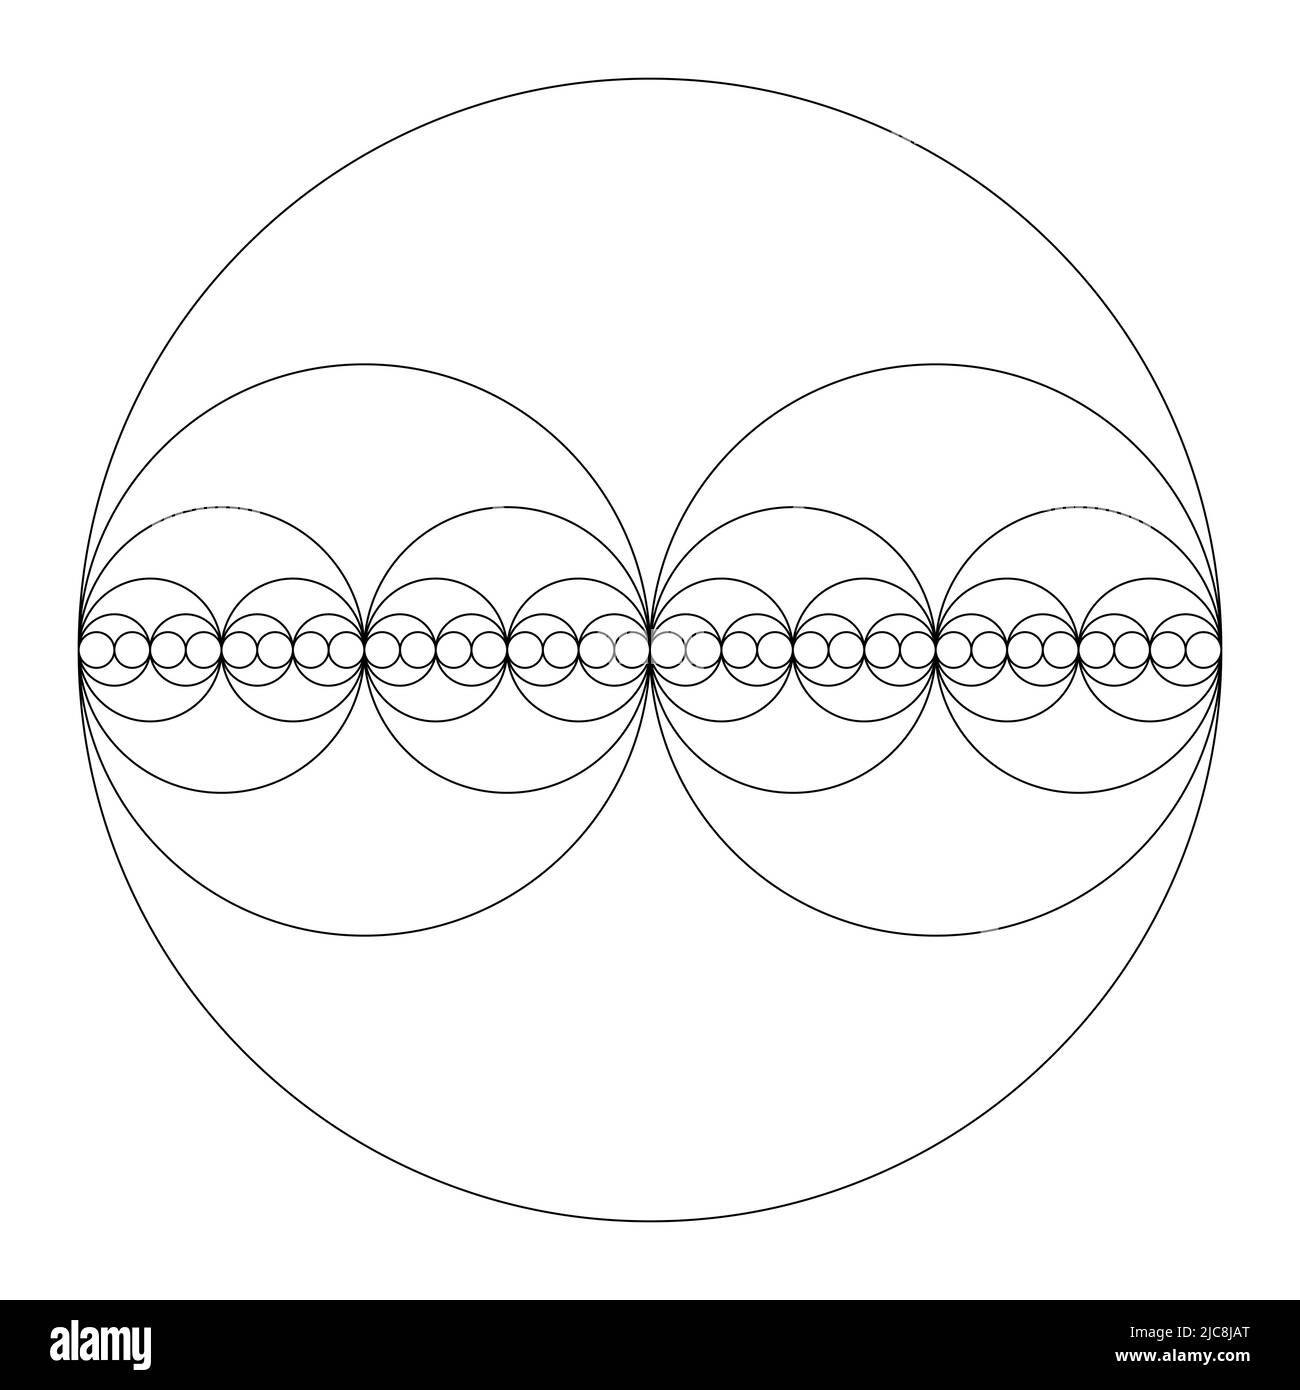 Circles forming a binary sequence. Circles, halved in diameters, showing the Power of Two, the exponentiation with number two. Stock Photo